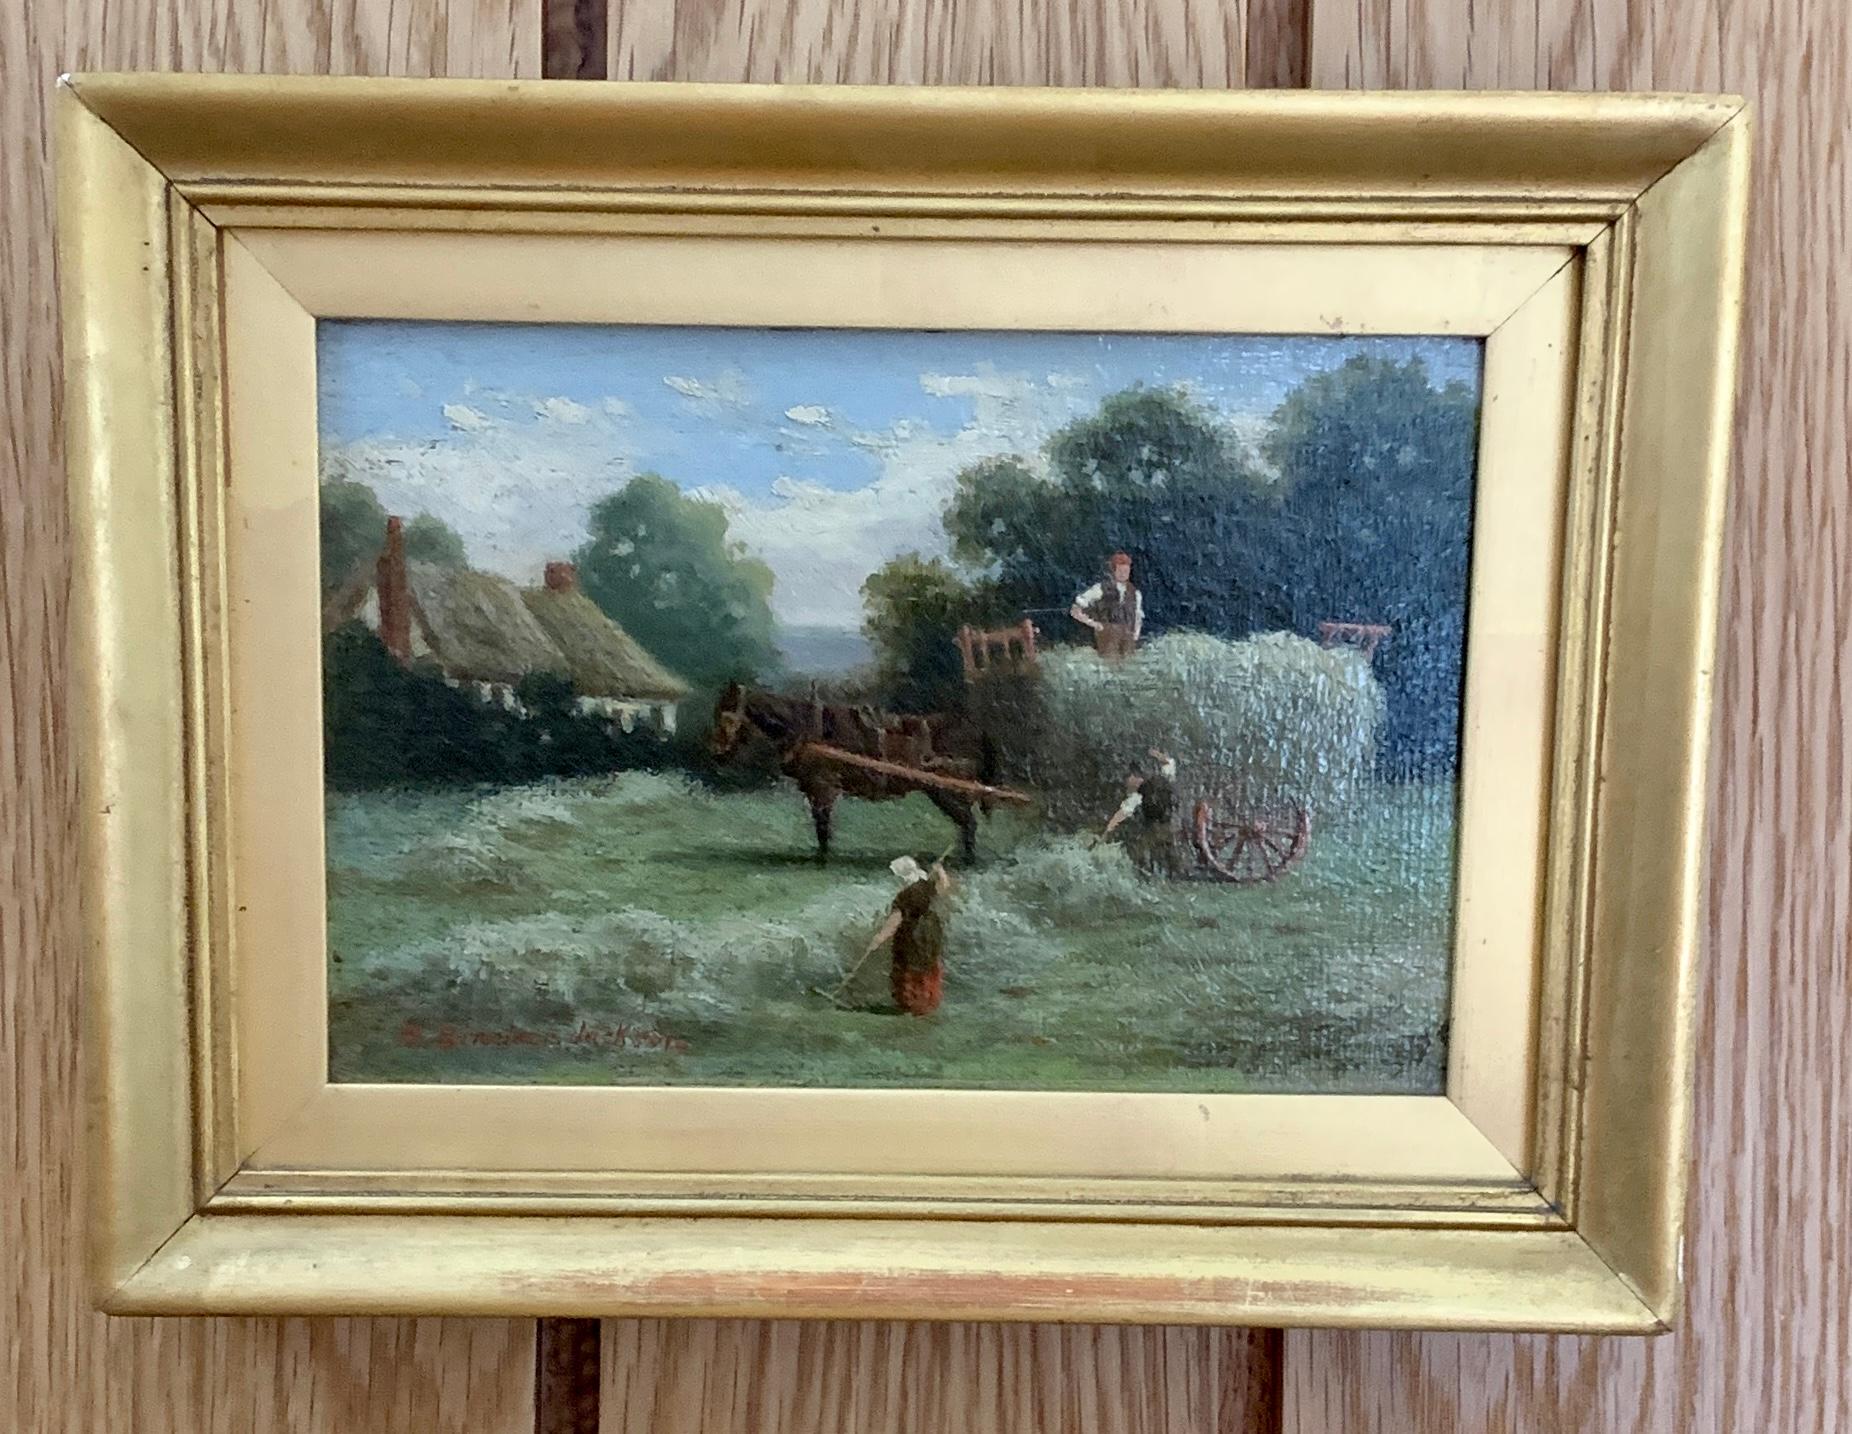 Victorian English 19th century landscape with cart, Farmers, Horse and harvest - Painting by Henry Sinclair Jackson